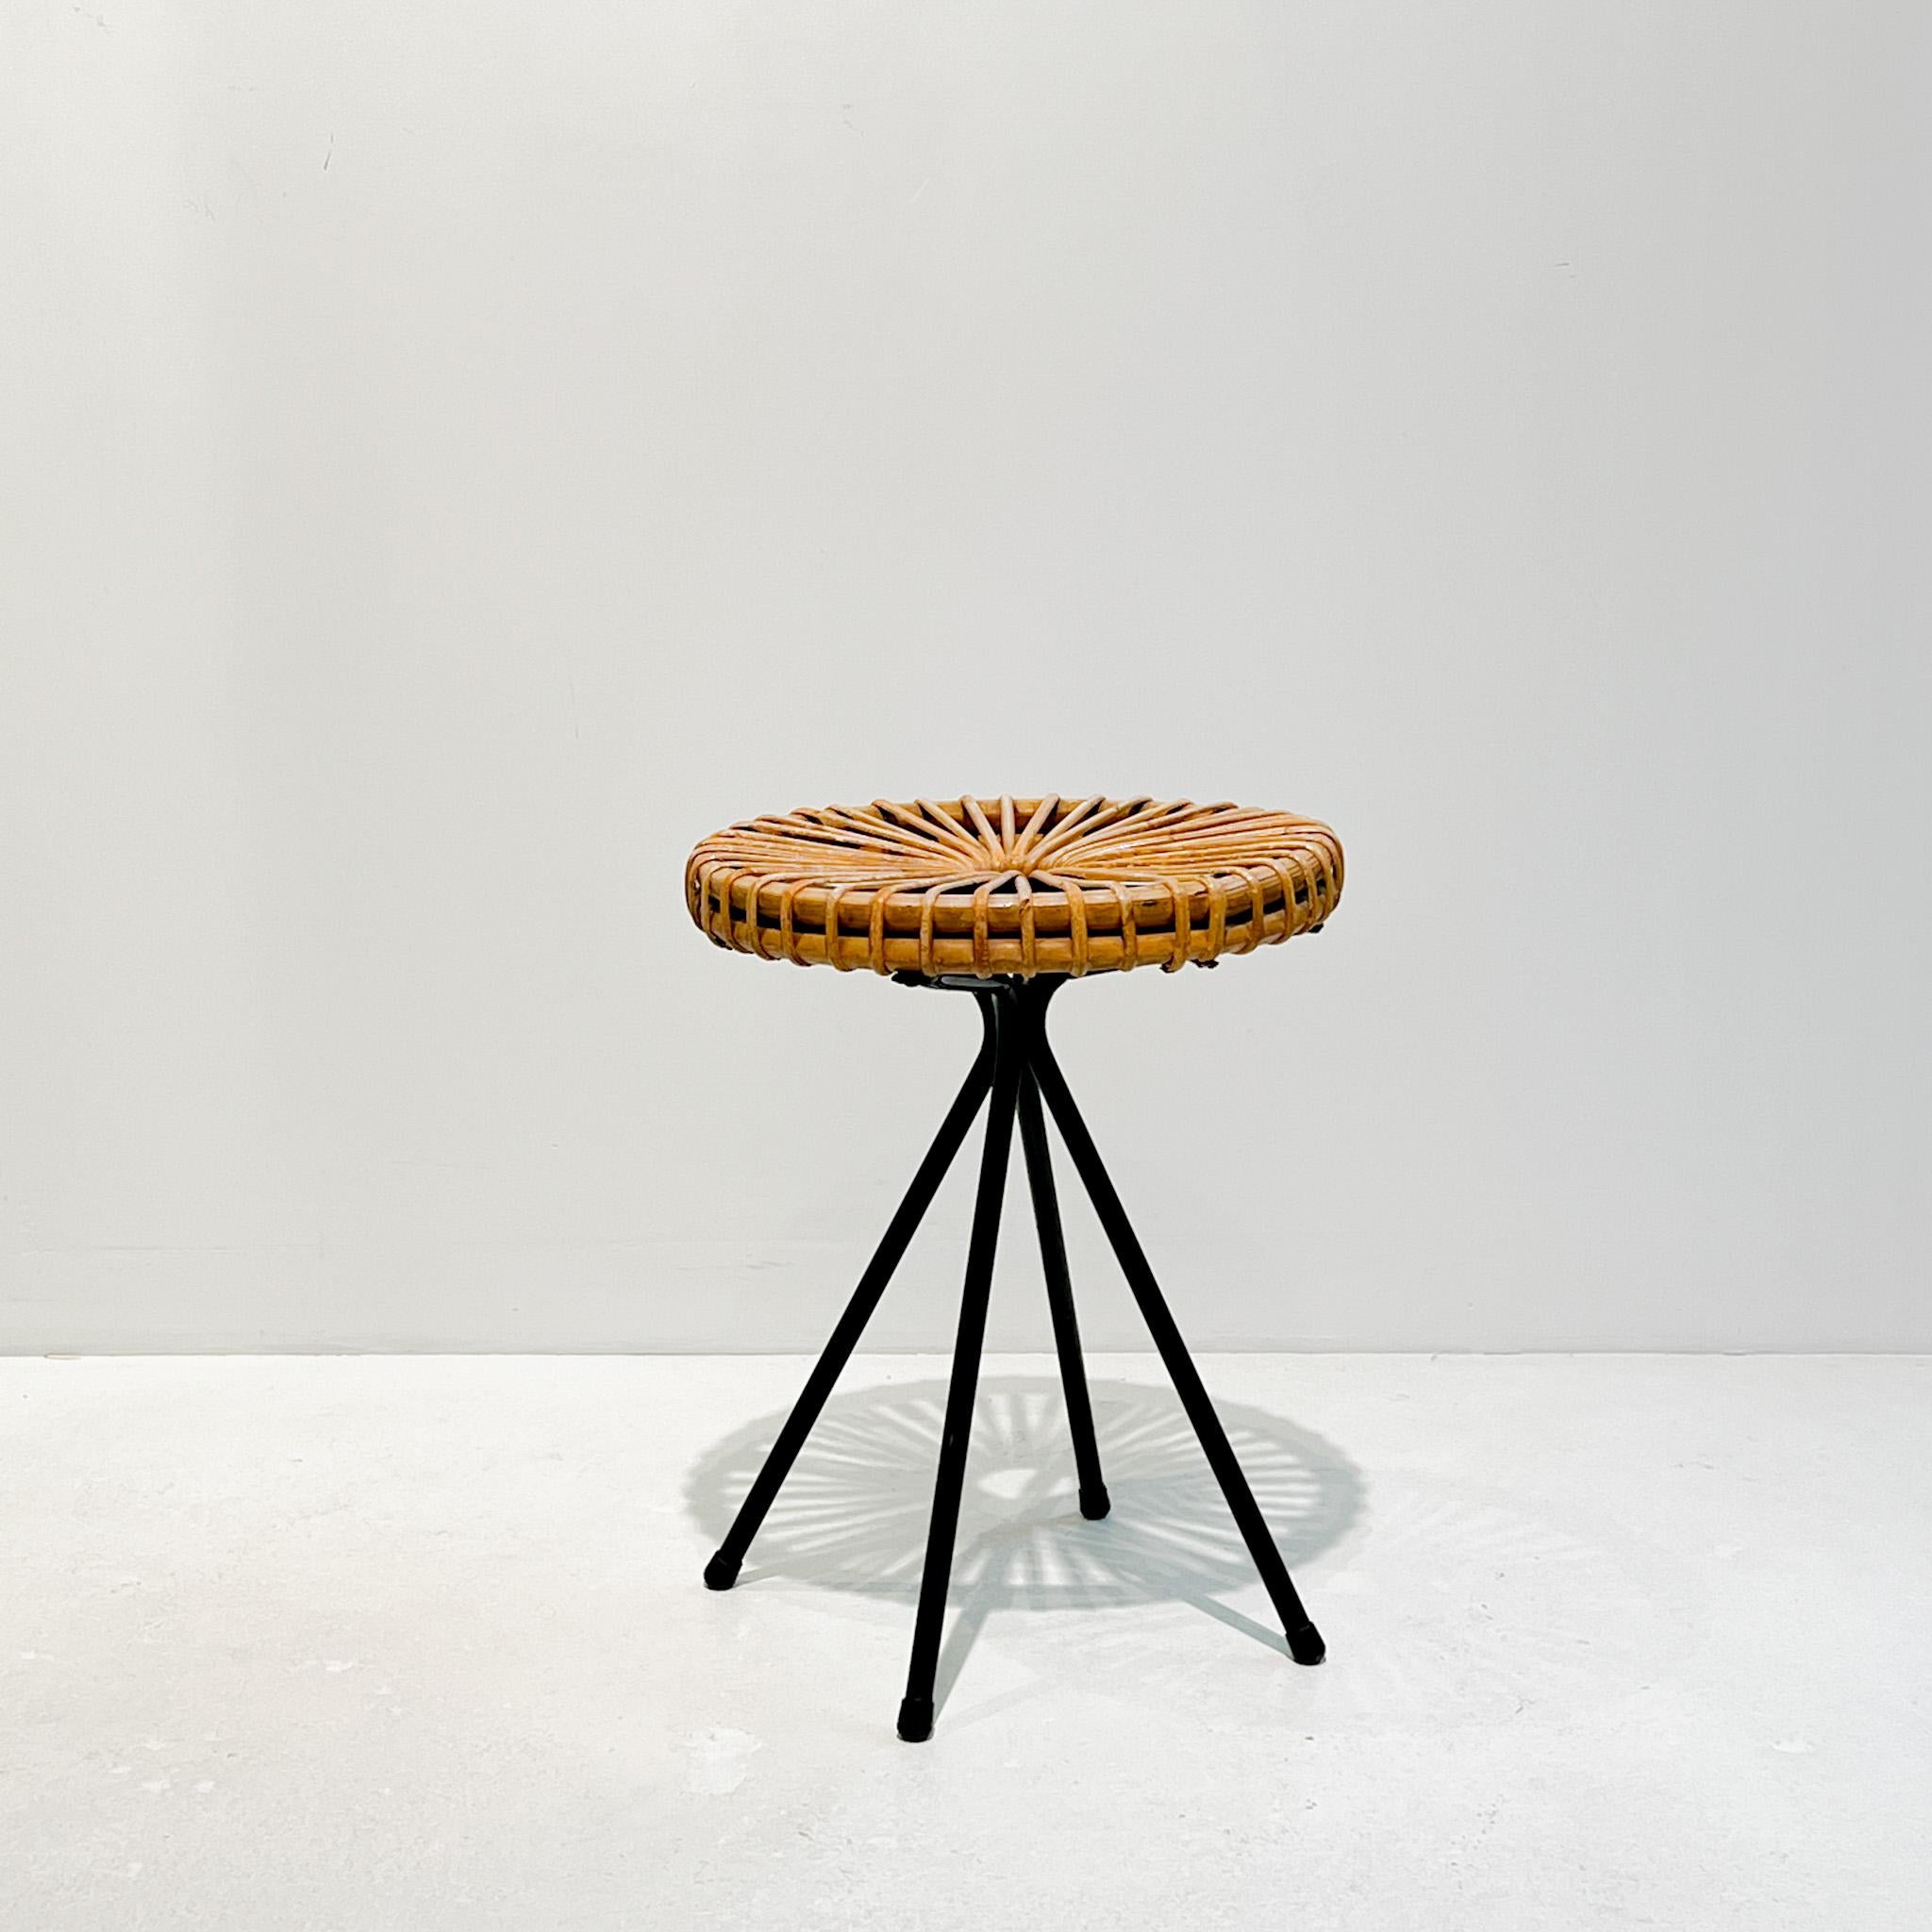 An elegant rattan stool designed by Dirk van Sliedrecht for Rohe Noordwolde, Holland, in the late 1950s. With a black lacquered metal base and a rattan seat.

'Dirk van Sliedregt (1920-2010) went from being a furniture maker to furniture designer